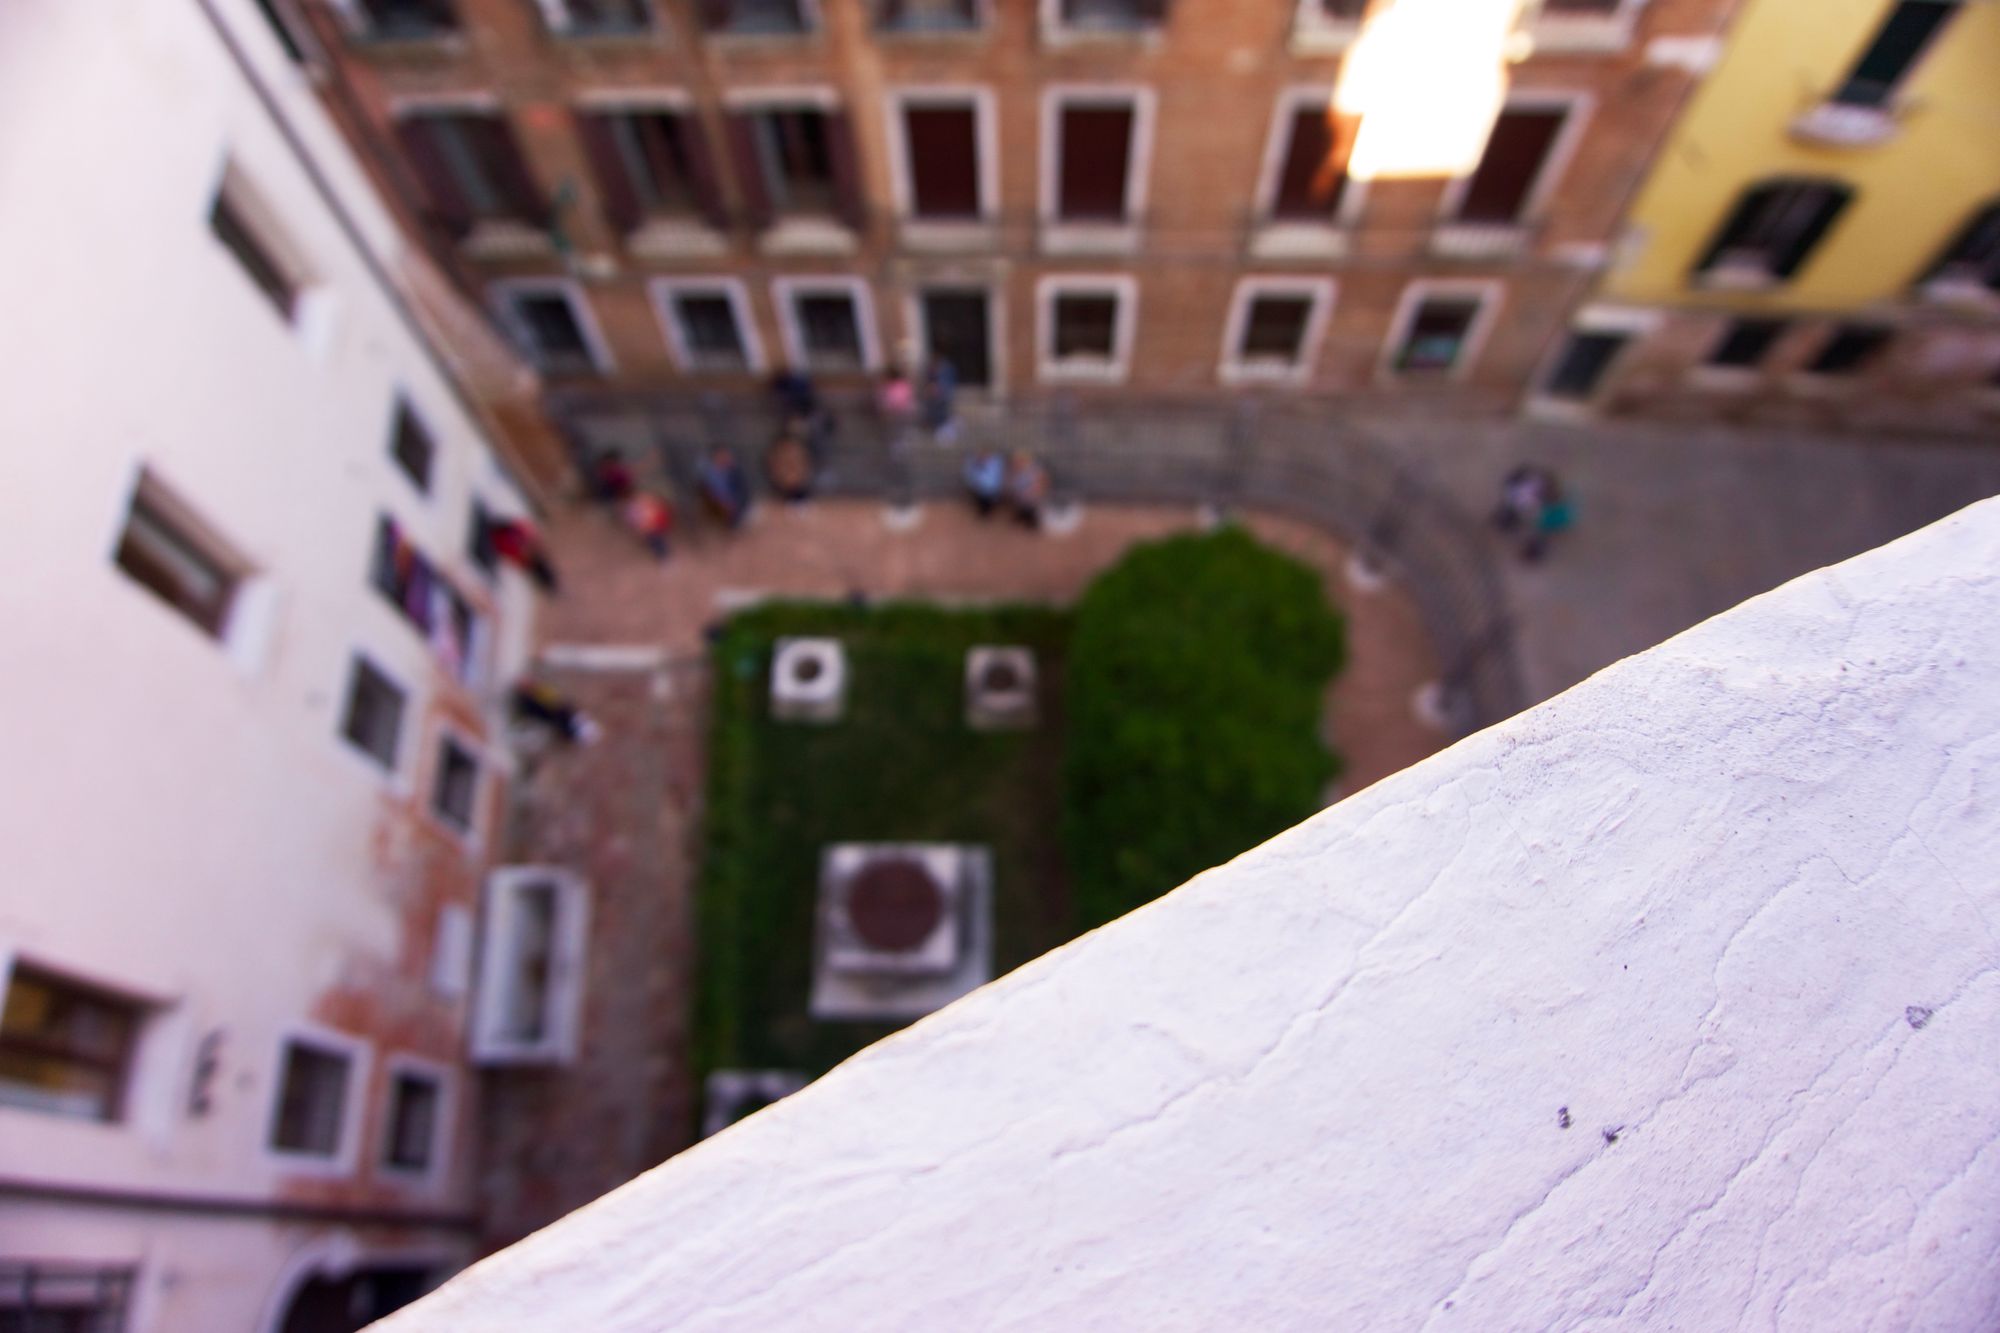 View down on a small garden on a terrazzo square, with people queuing outside the fence. It's inside a courtyard formed by several larger buildings in white, terracotta, and yellow. A reflection casts a sharp white rectangle on the terracotta building. In the foreground, a balustrade is painted white in sloppy ridges.